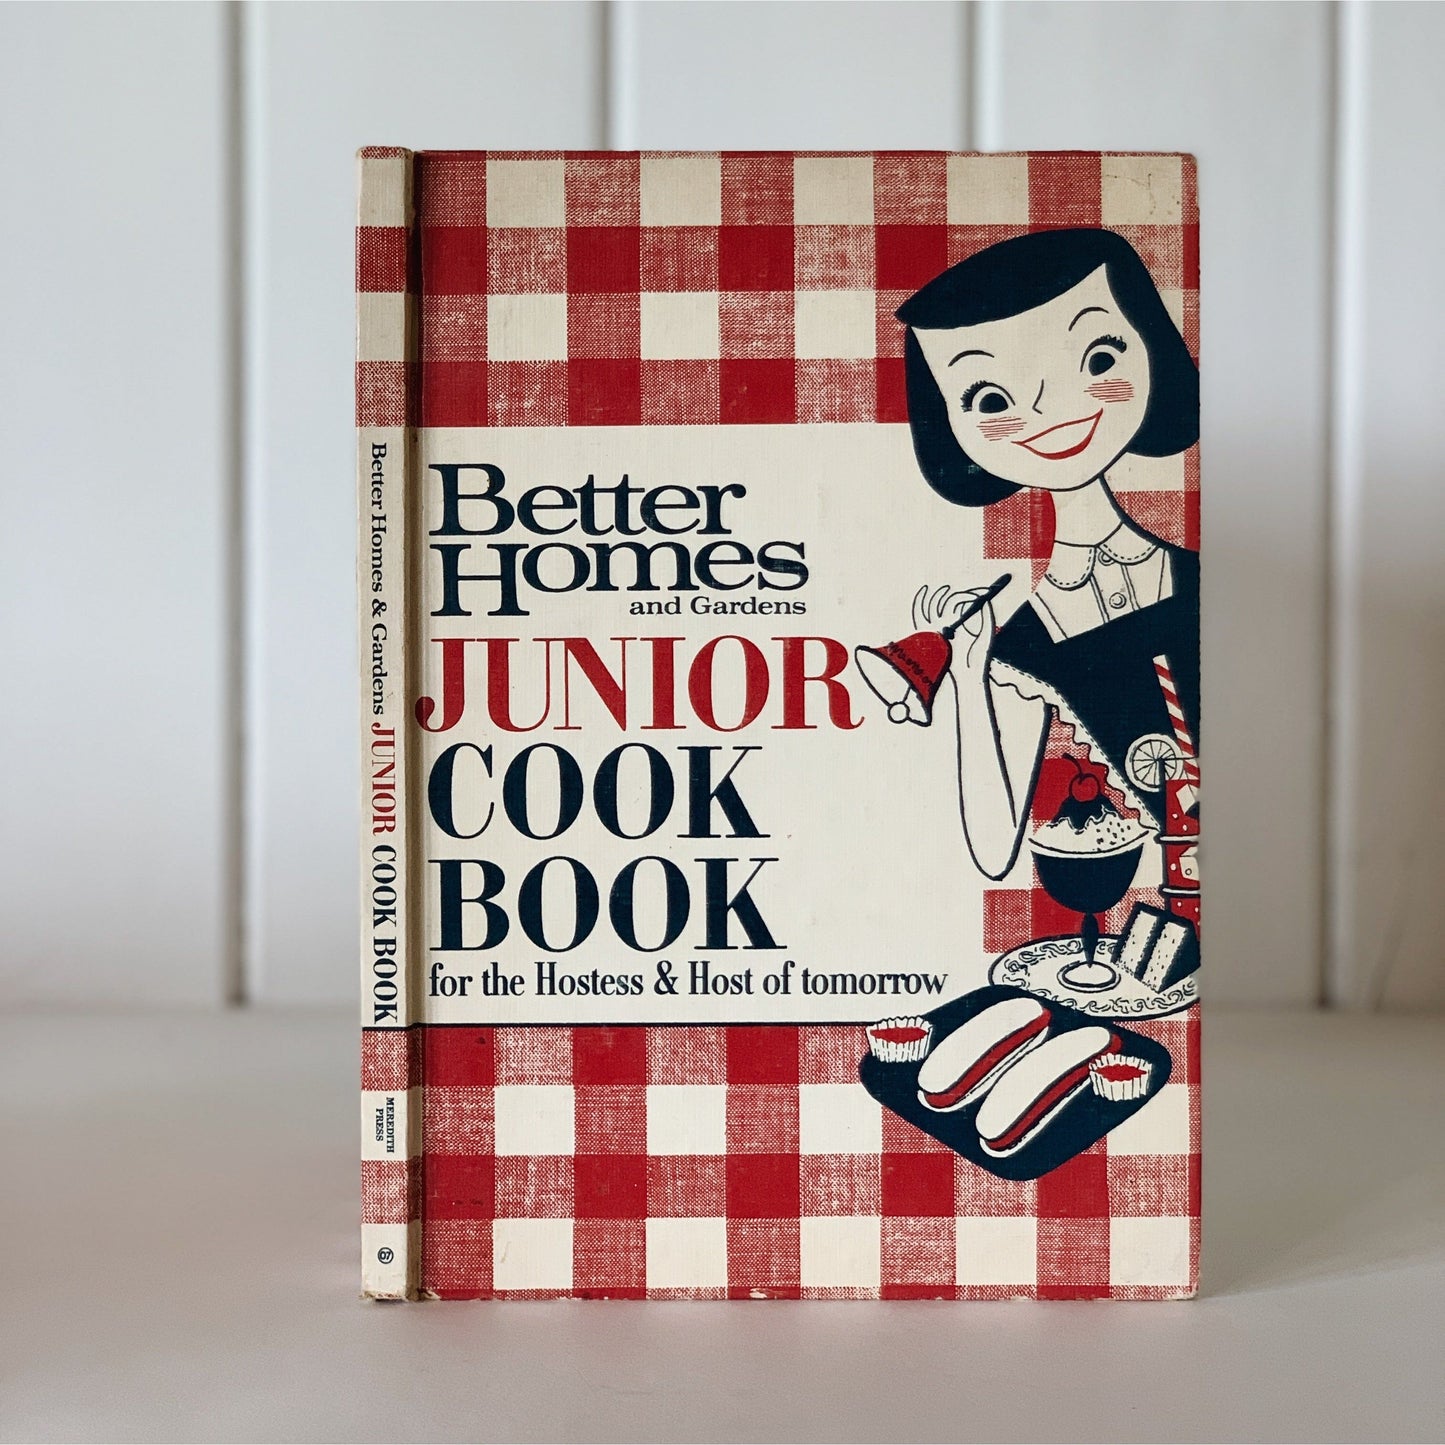 Better Homes and Gardens Junior Cook Book, 1963